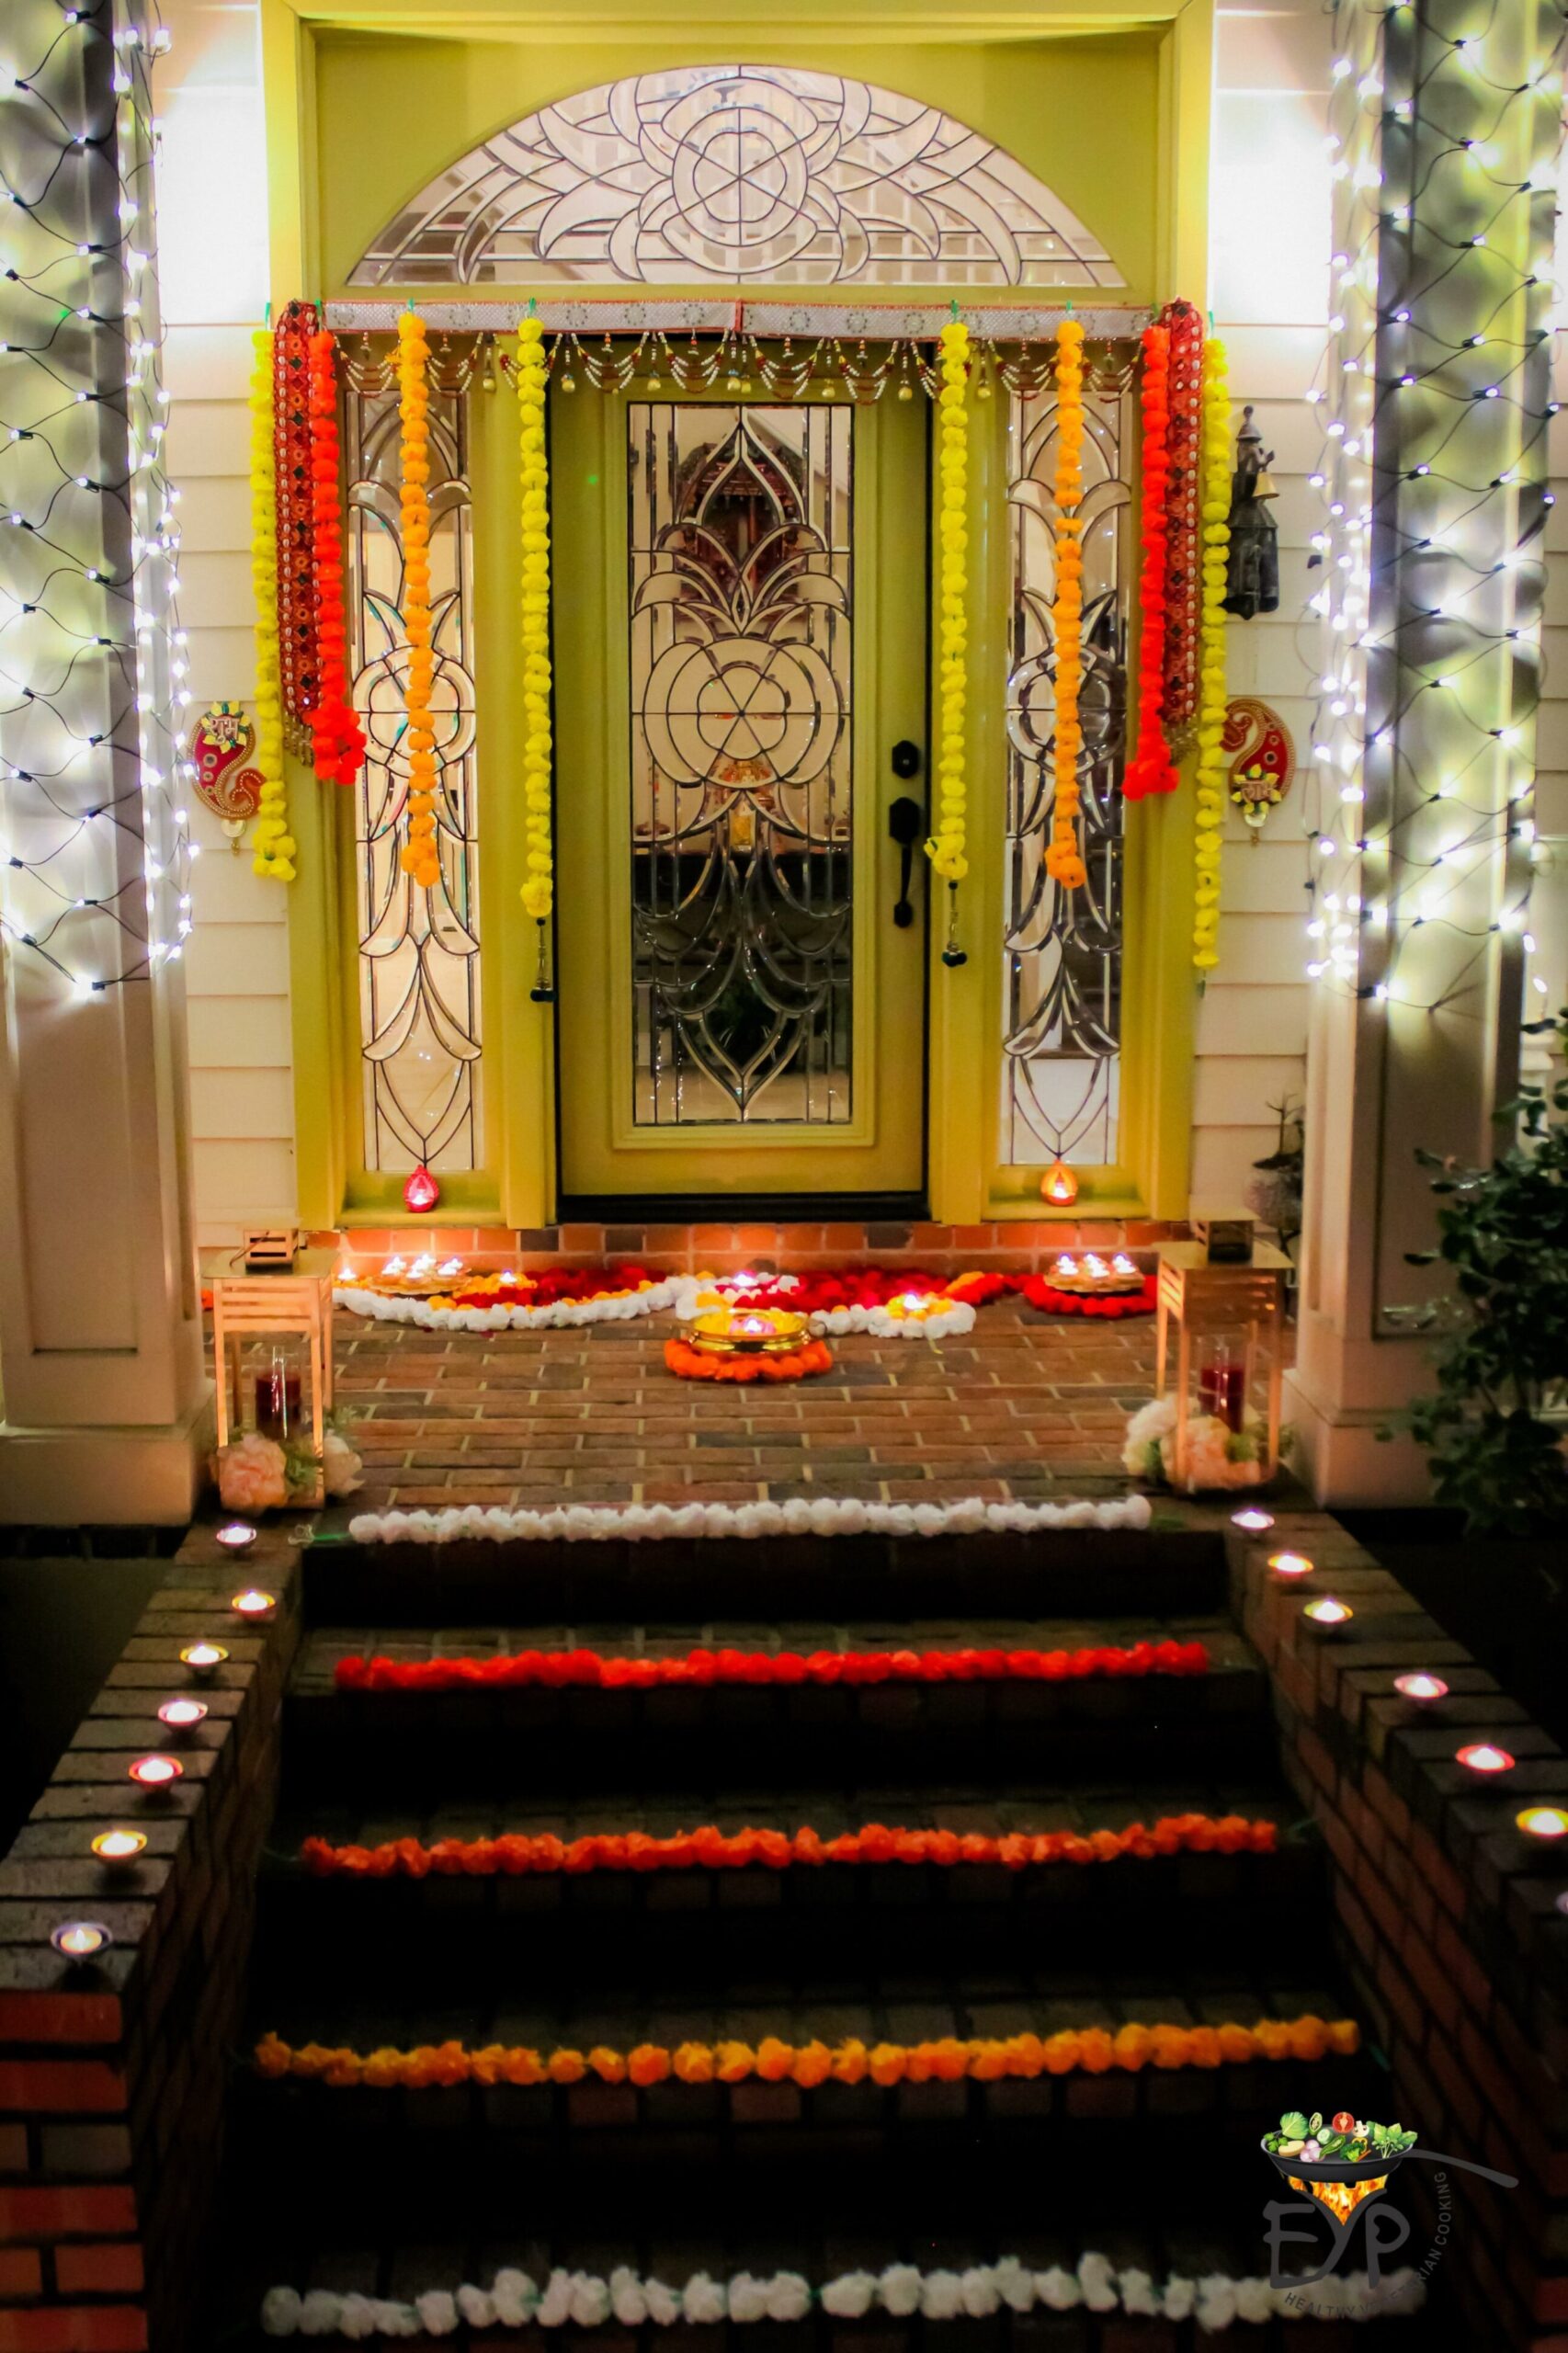 Spice Up Your Space: Diwali Home Decor Tips To Add Sparkle And Shine